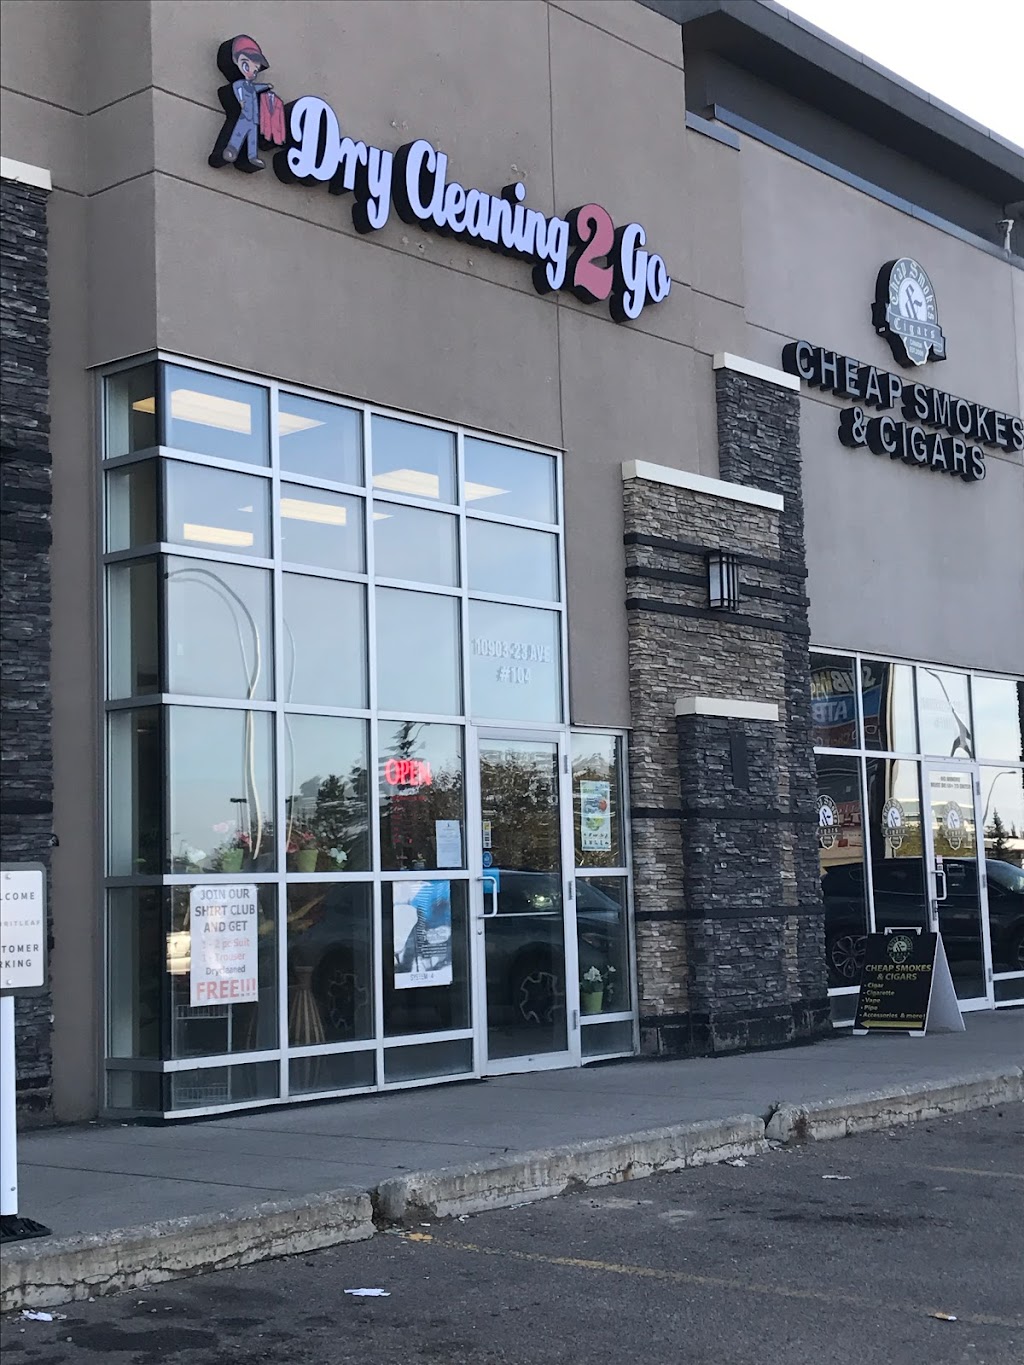 Dry Cleaning 2 Go | 10903 23 Ave NW Unit #104, Edmonton, AB T6J 1X3, Canada | Phone: (780) 438-1768